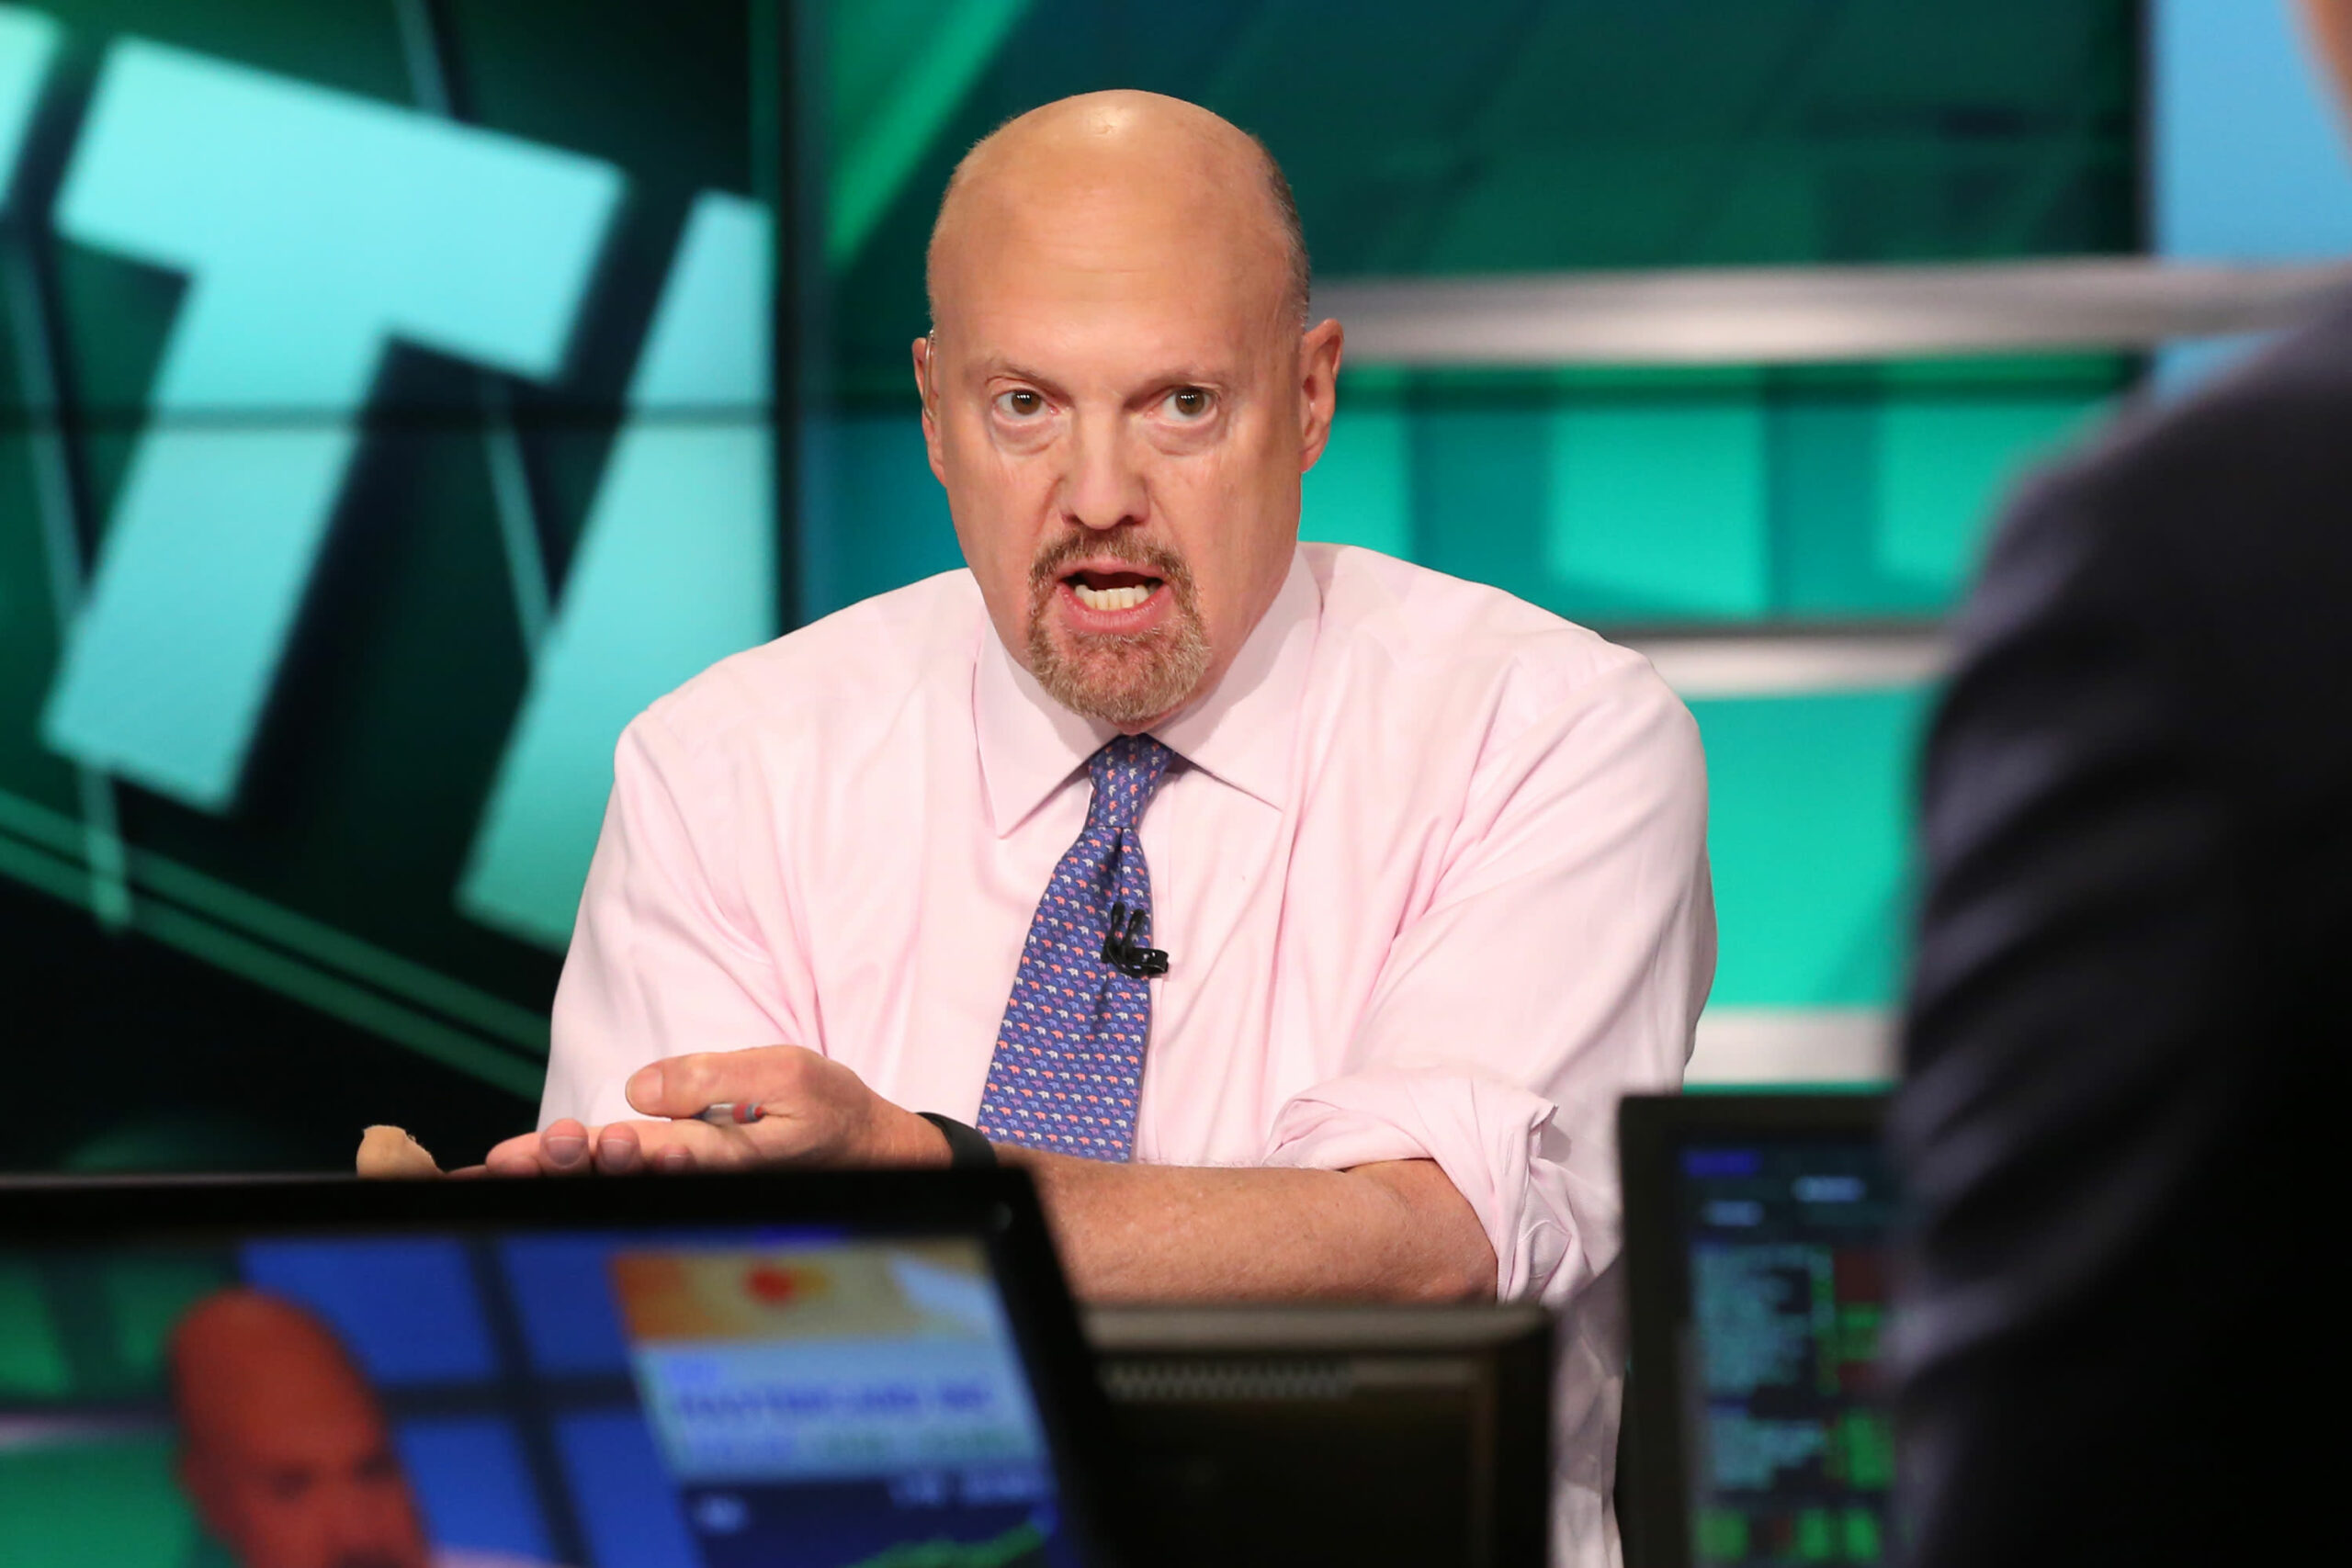 Cramer says the market is treacherous right now and we need some stabilization in tech